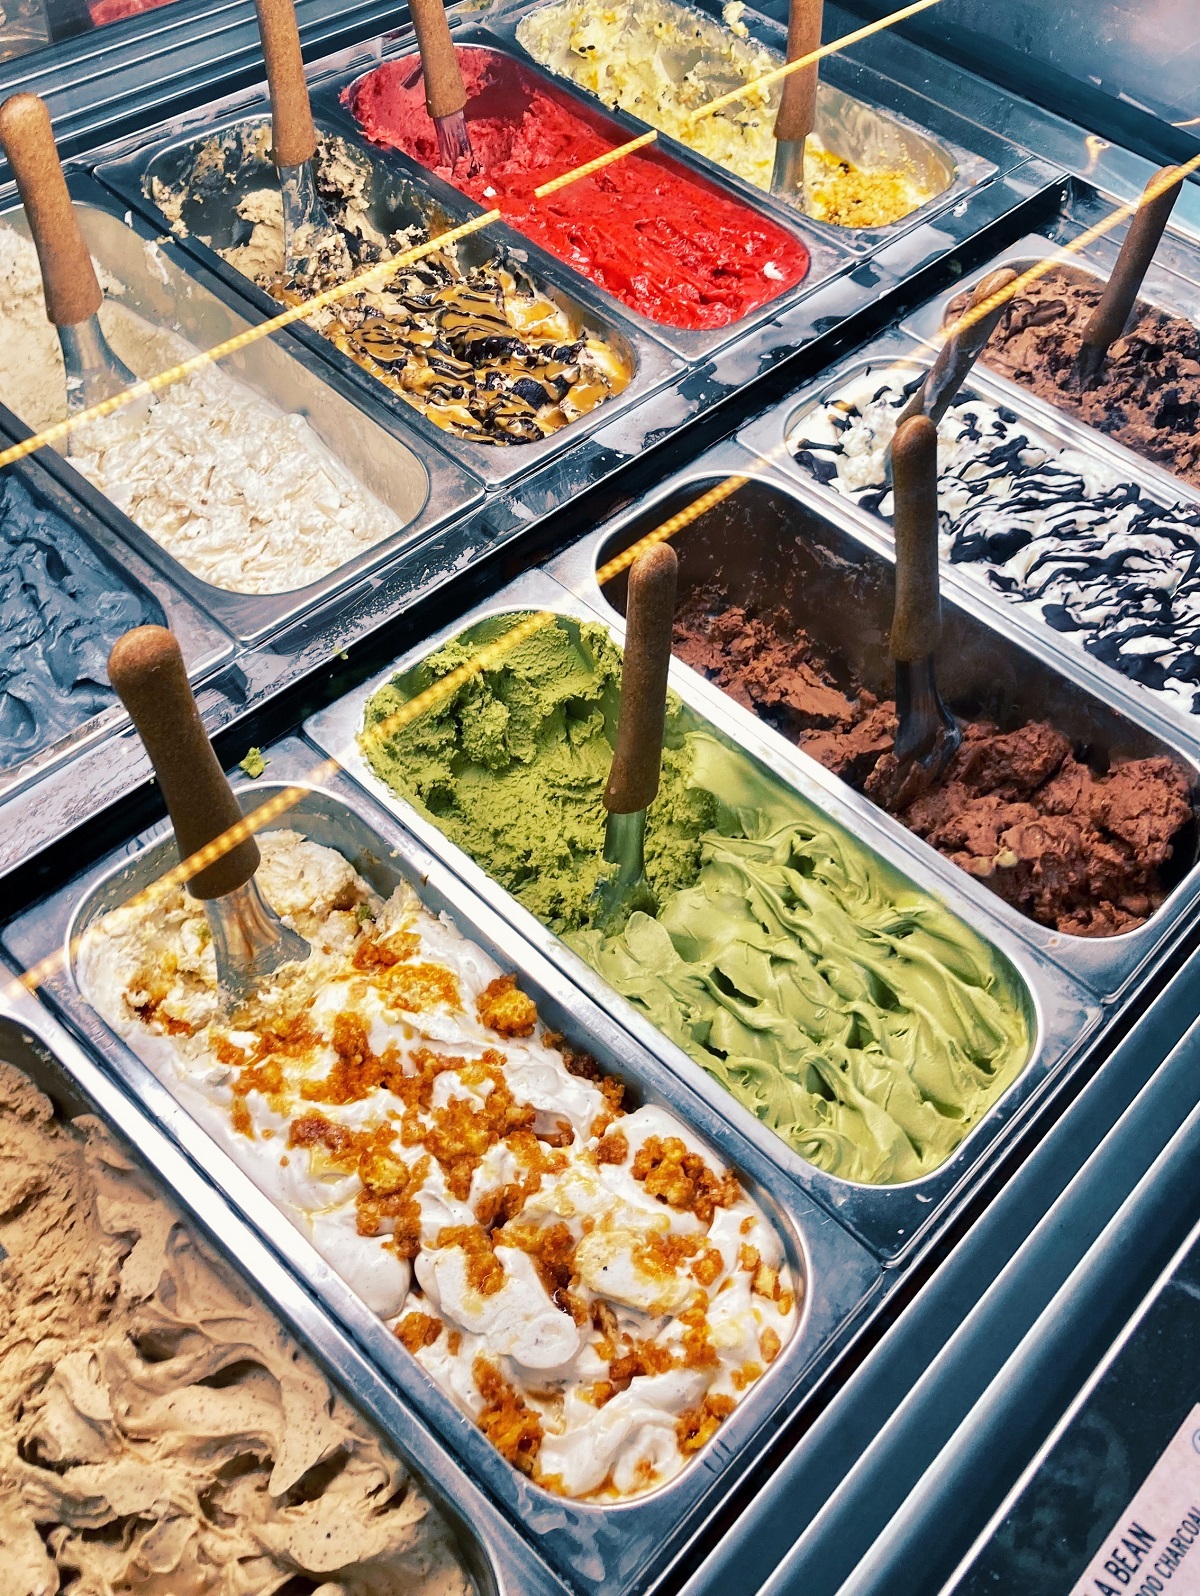 Metal bins with gelato on display in many different colors